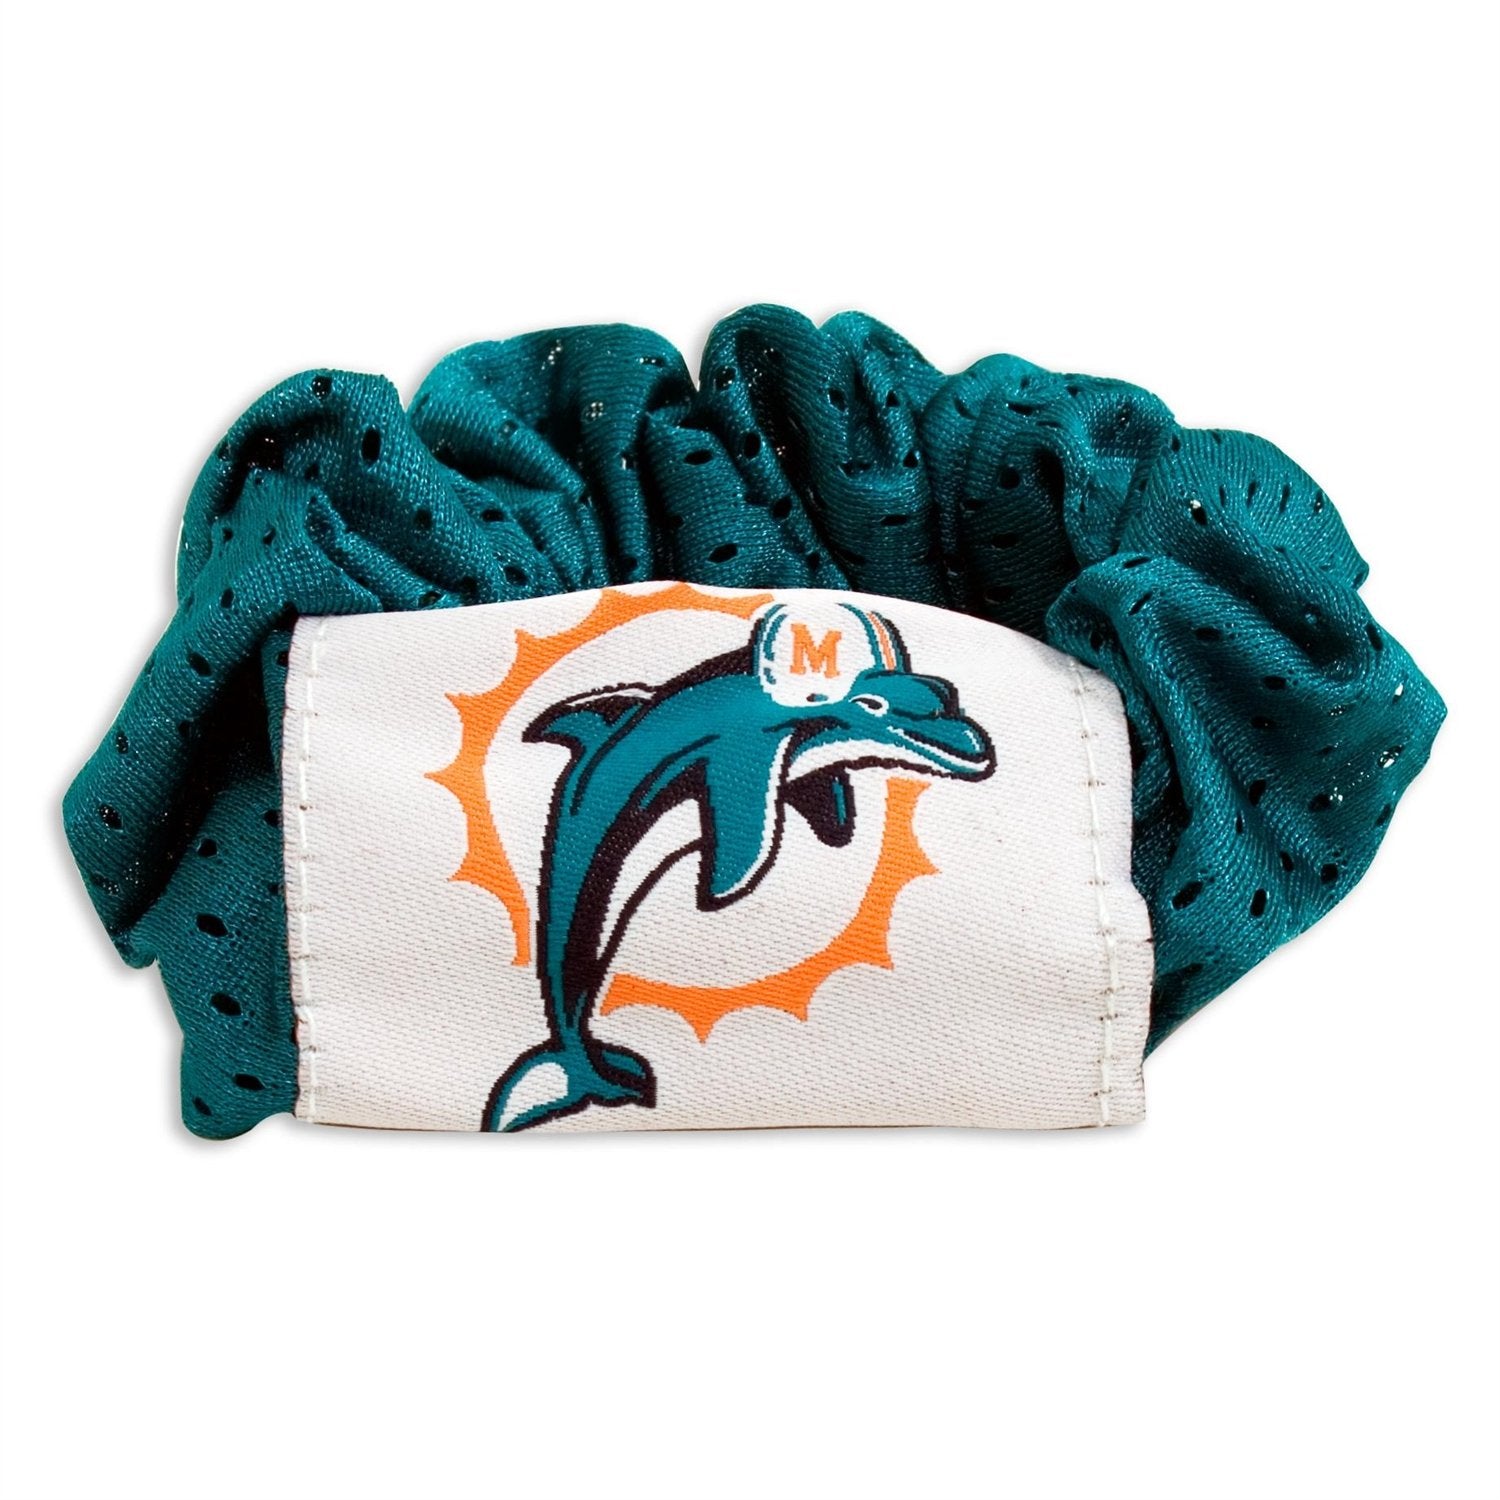 Official National Football League Fan Shop Authentic NFL Womens Infinity Scarf and Hair Scrunchie Bundle Set